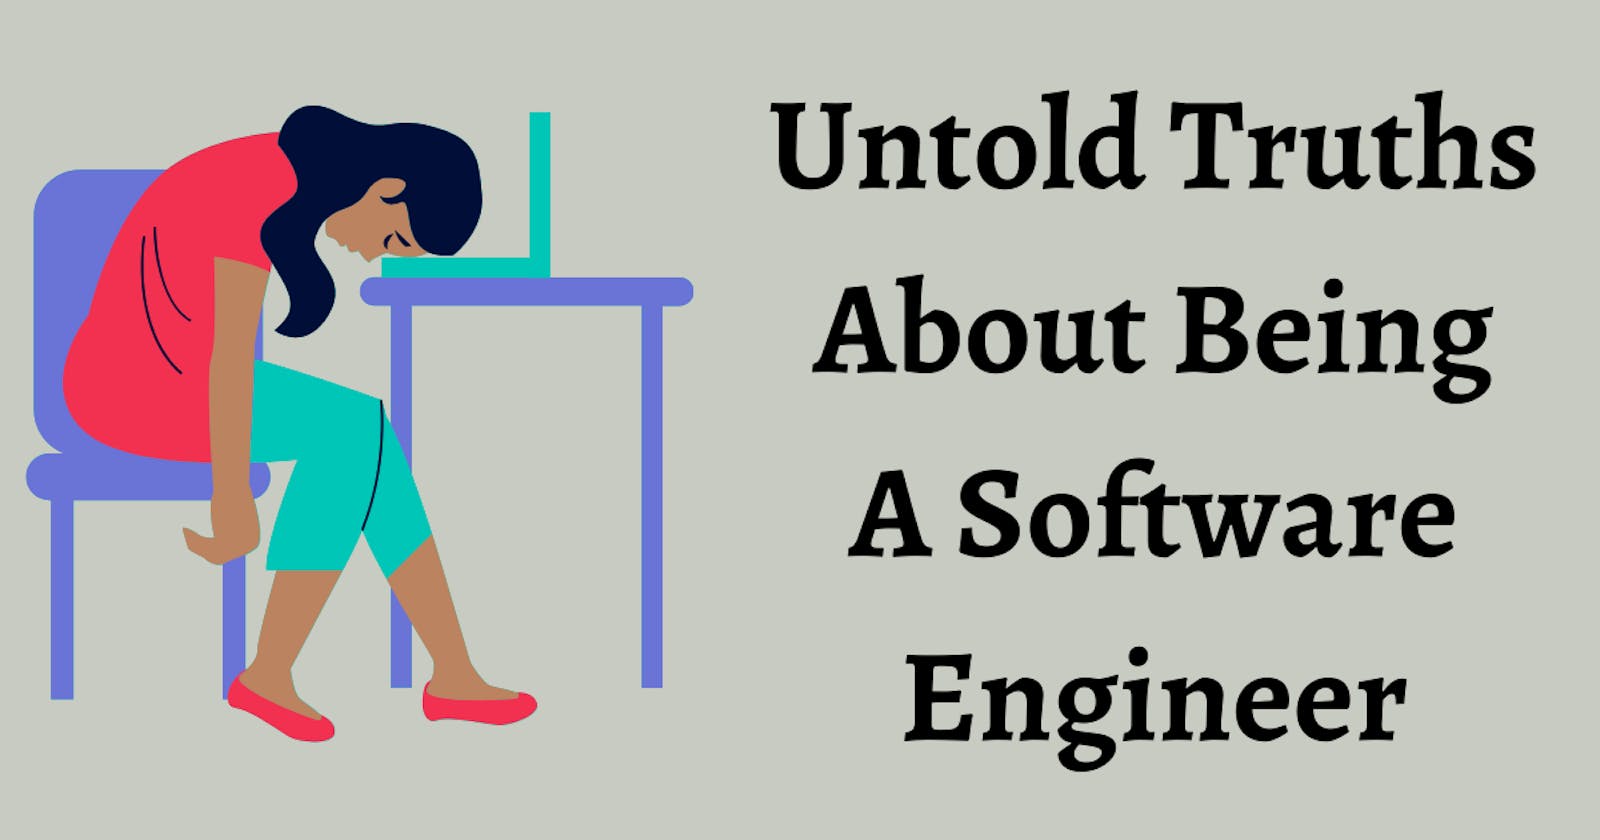 Untold Truths About Being A Software Engineer